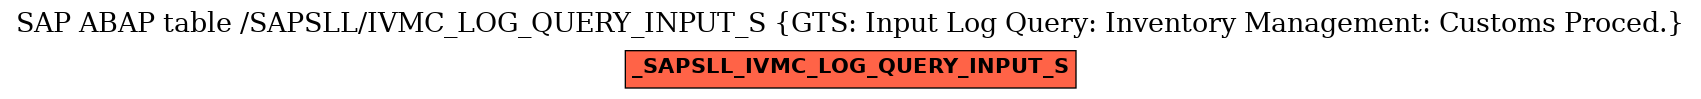 E-R Diagram for table /SAPSLL/IVMC_LOG_QUERY_INPUT_S (GTS: Input Log Query: Inventory Management: Customs Proced.)